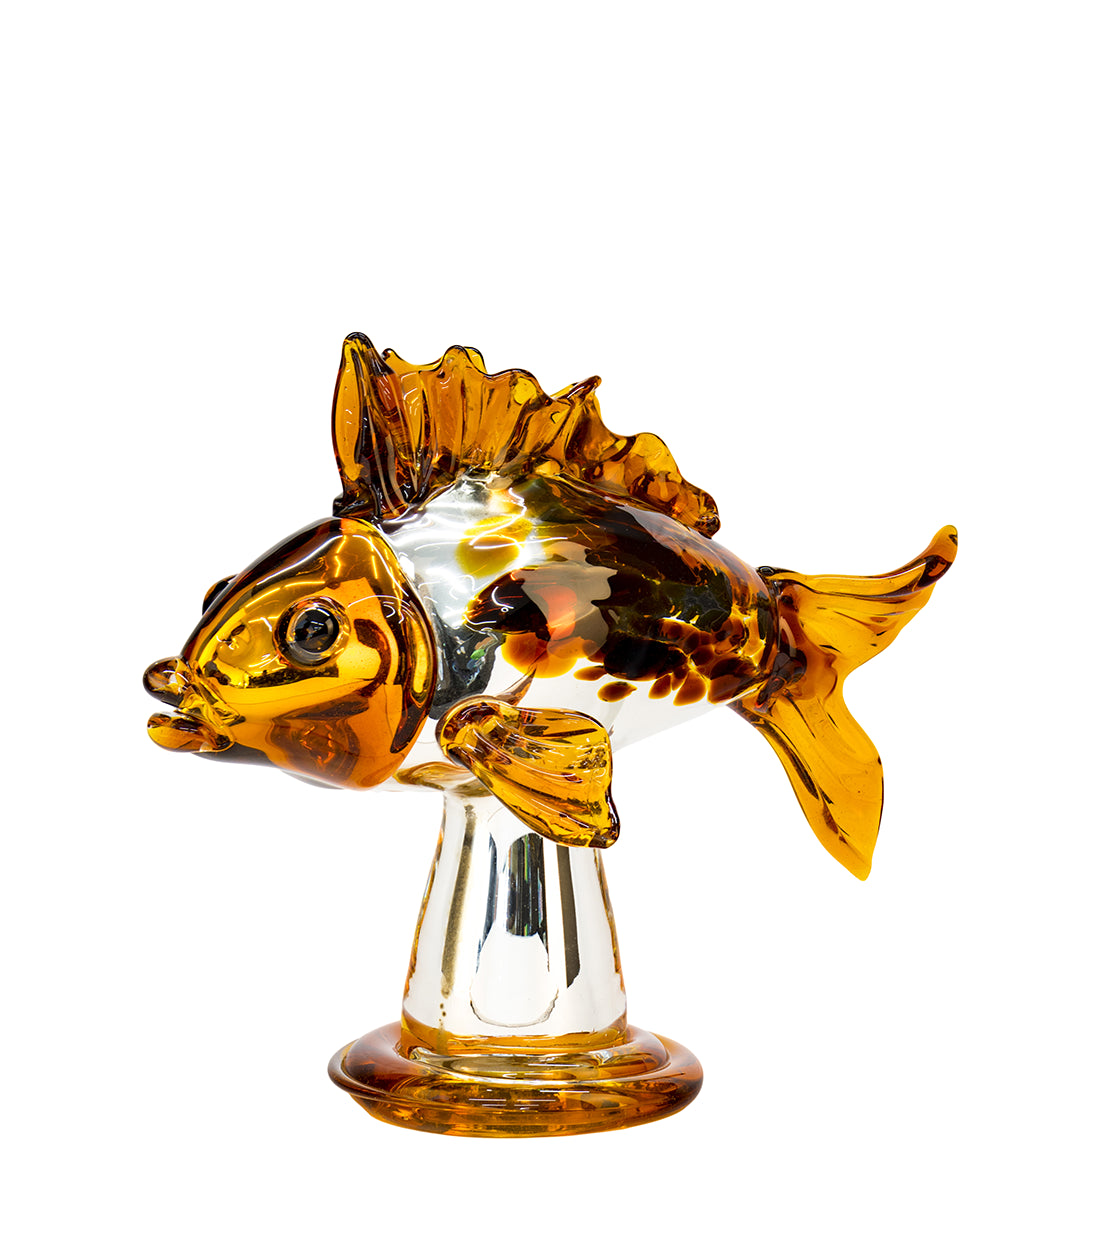 JIRI PACINEK - Seventh Heaven’s Gold Fish - Unique Fish Figuirine Perfect for Centre Table and Gifting.